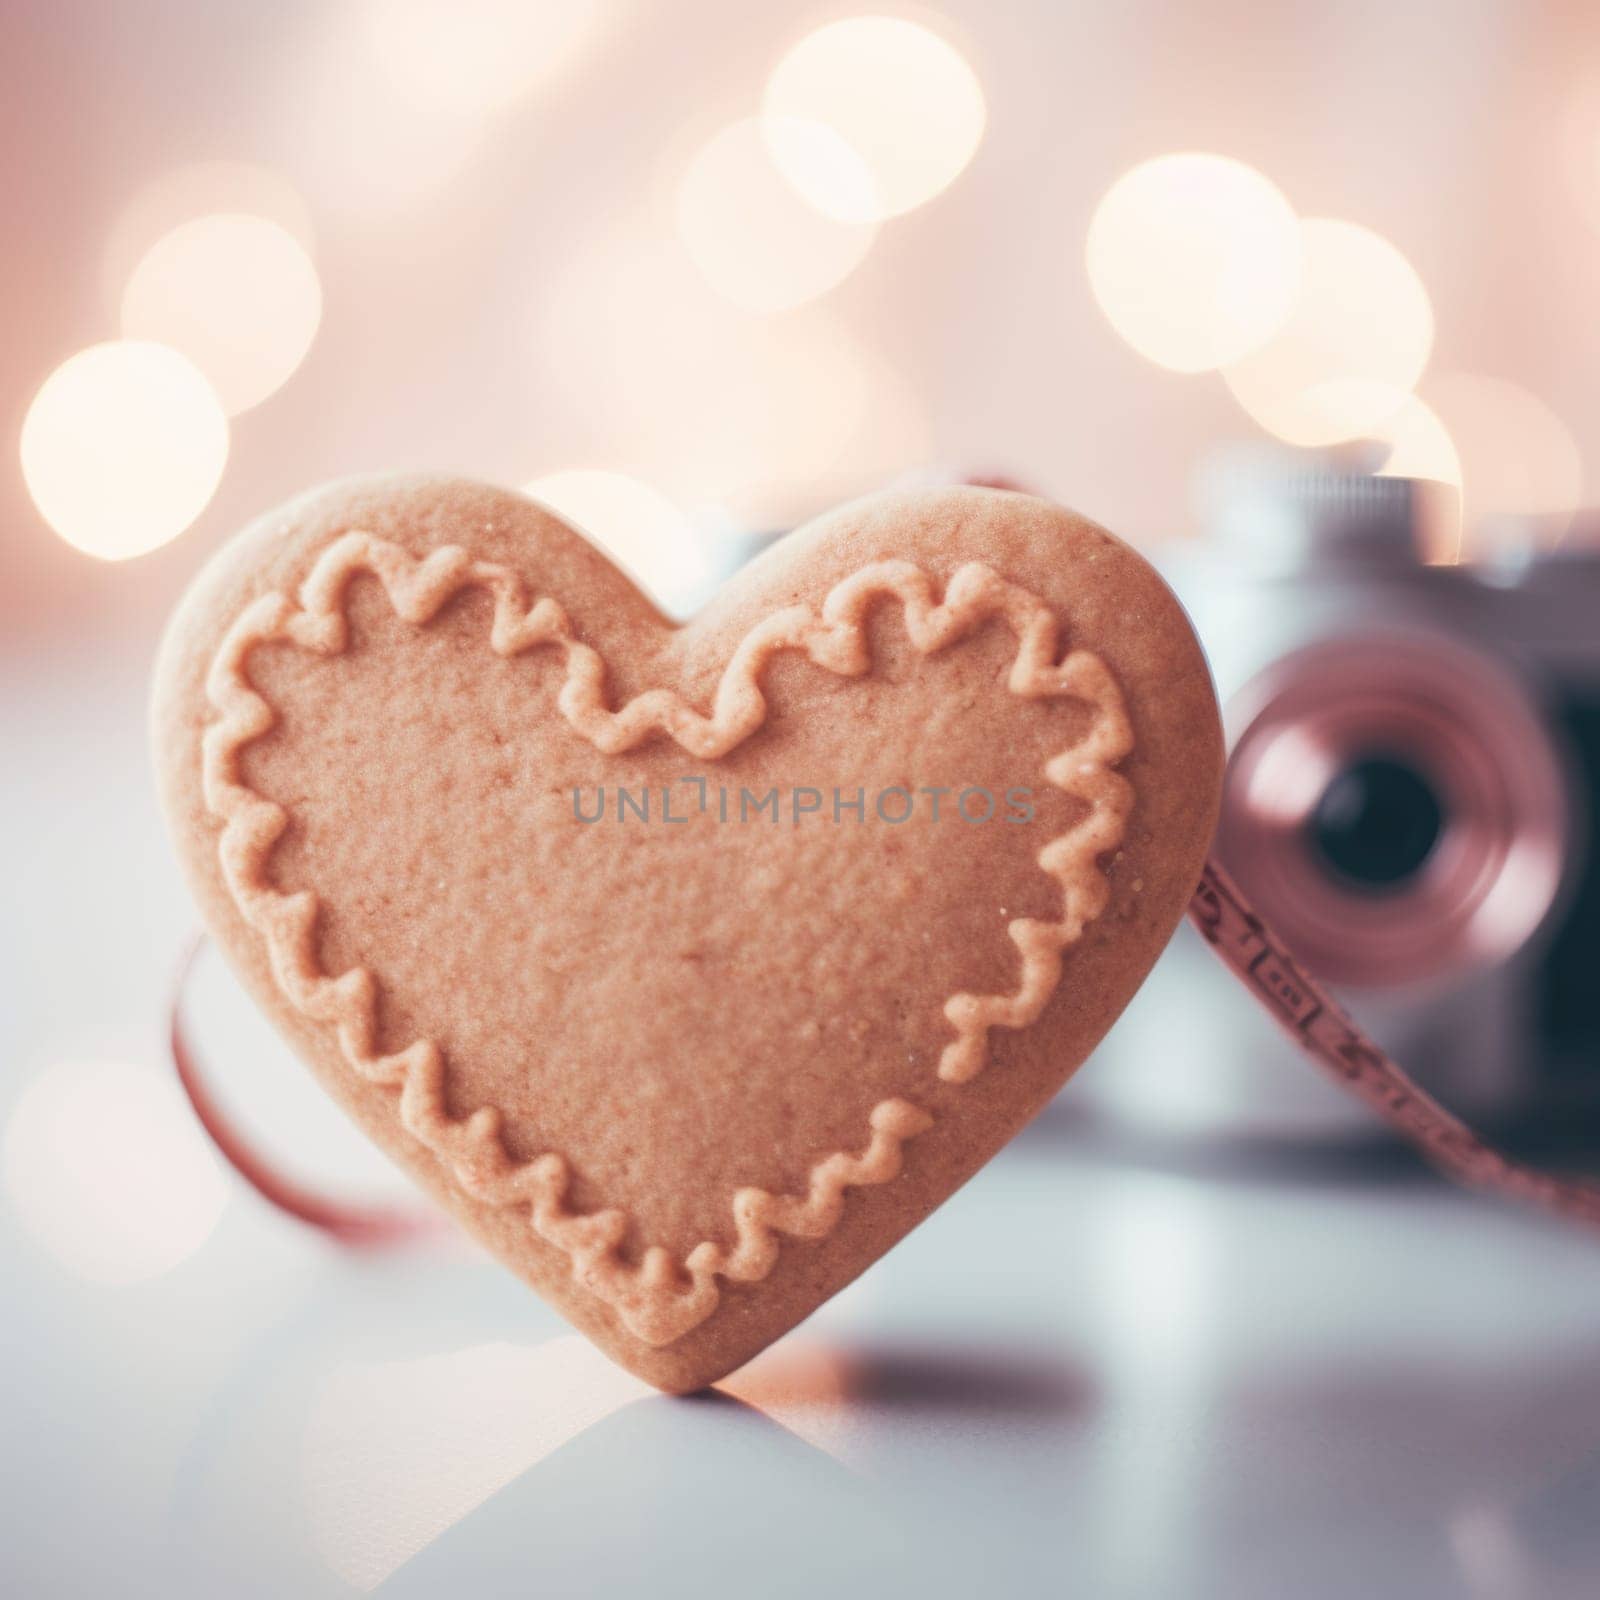 A heart shaped cookie with a camera on a table